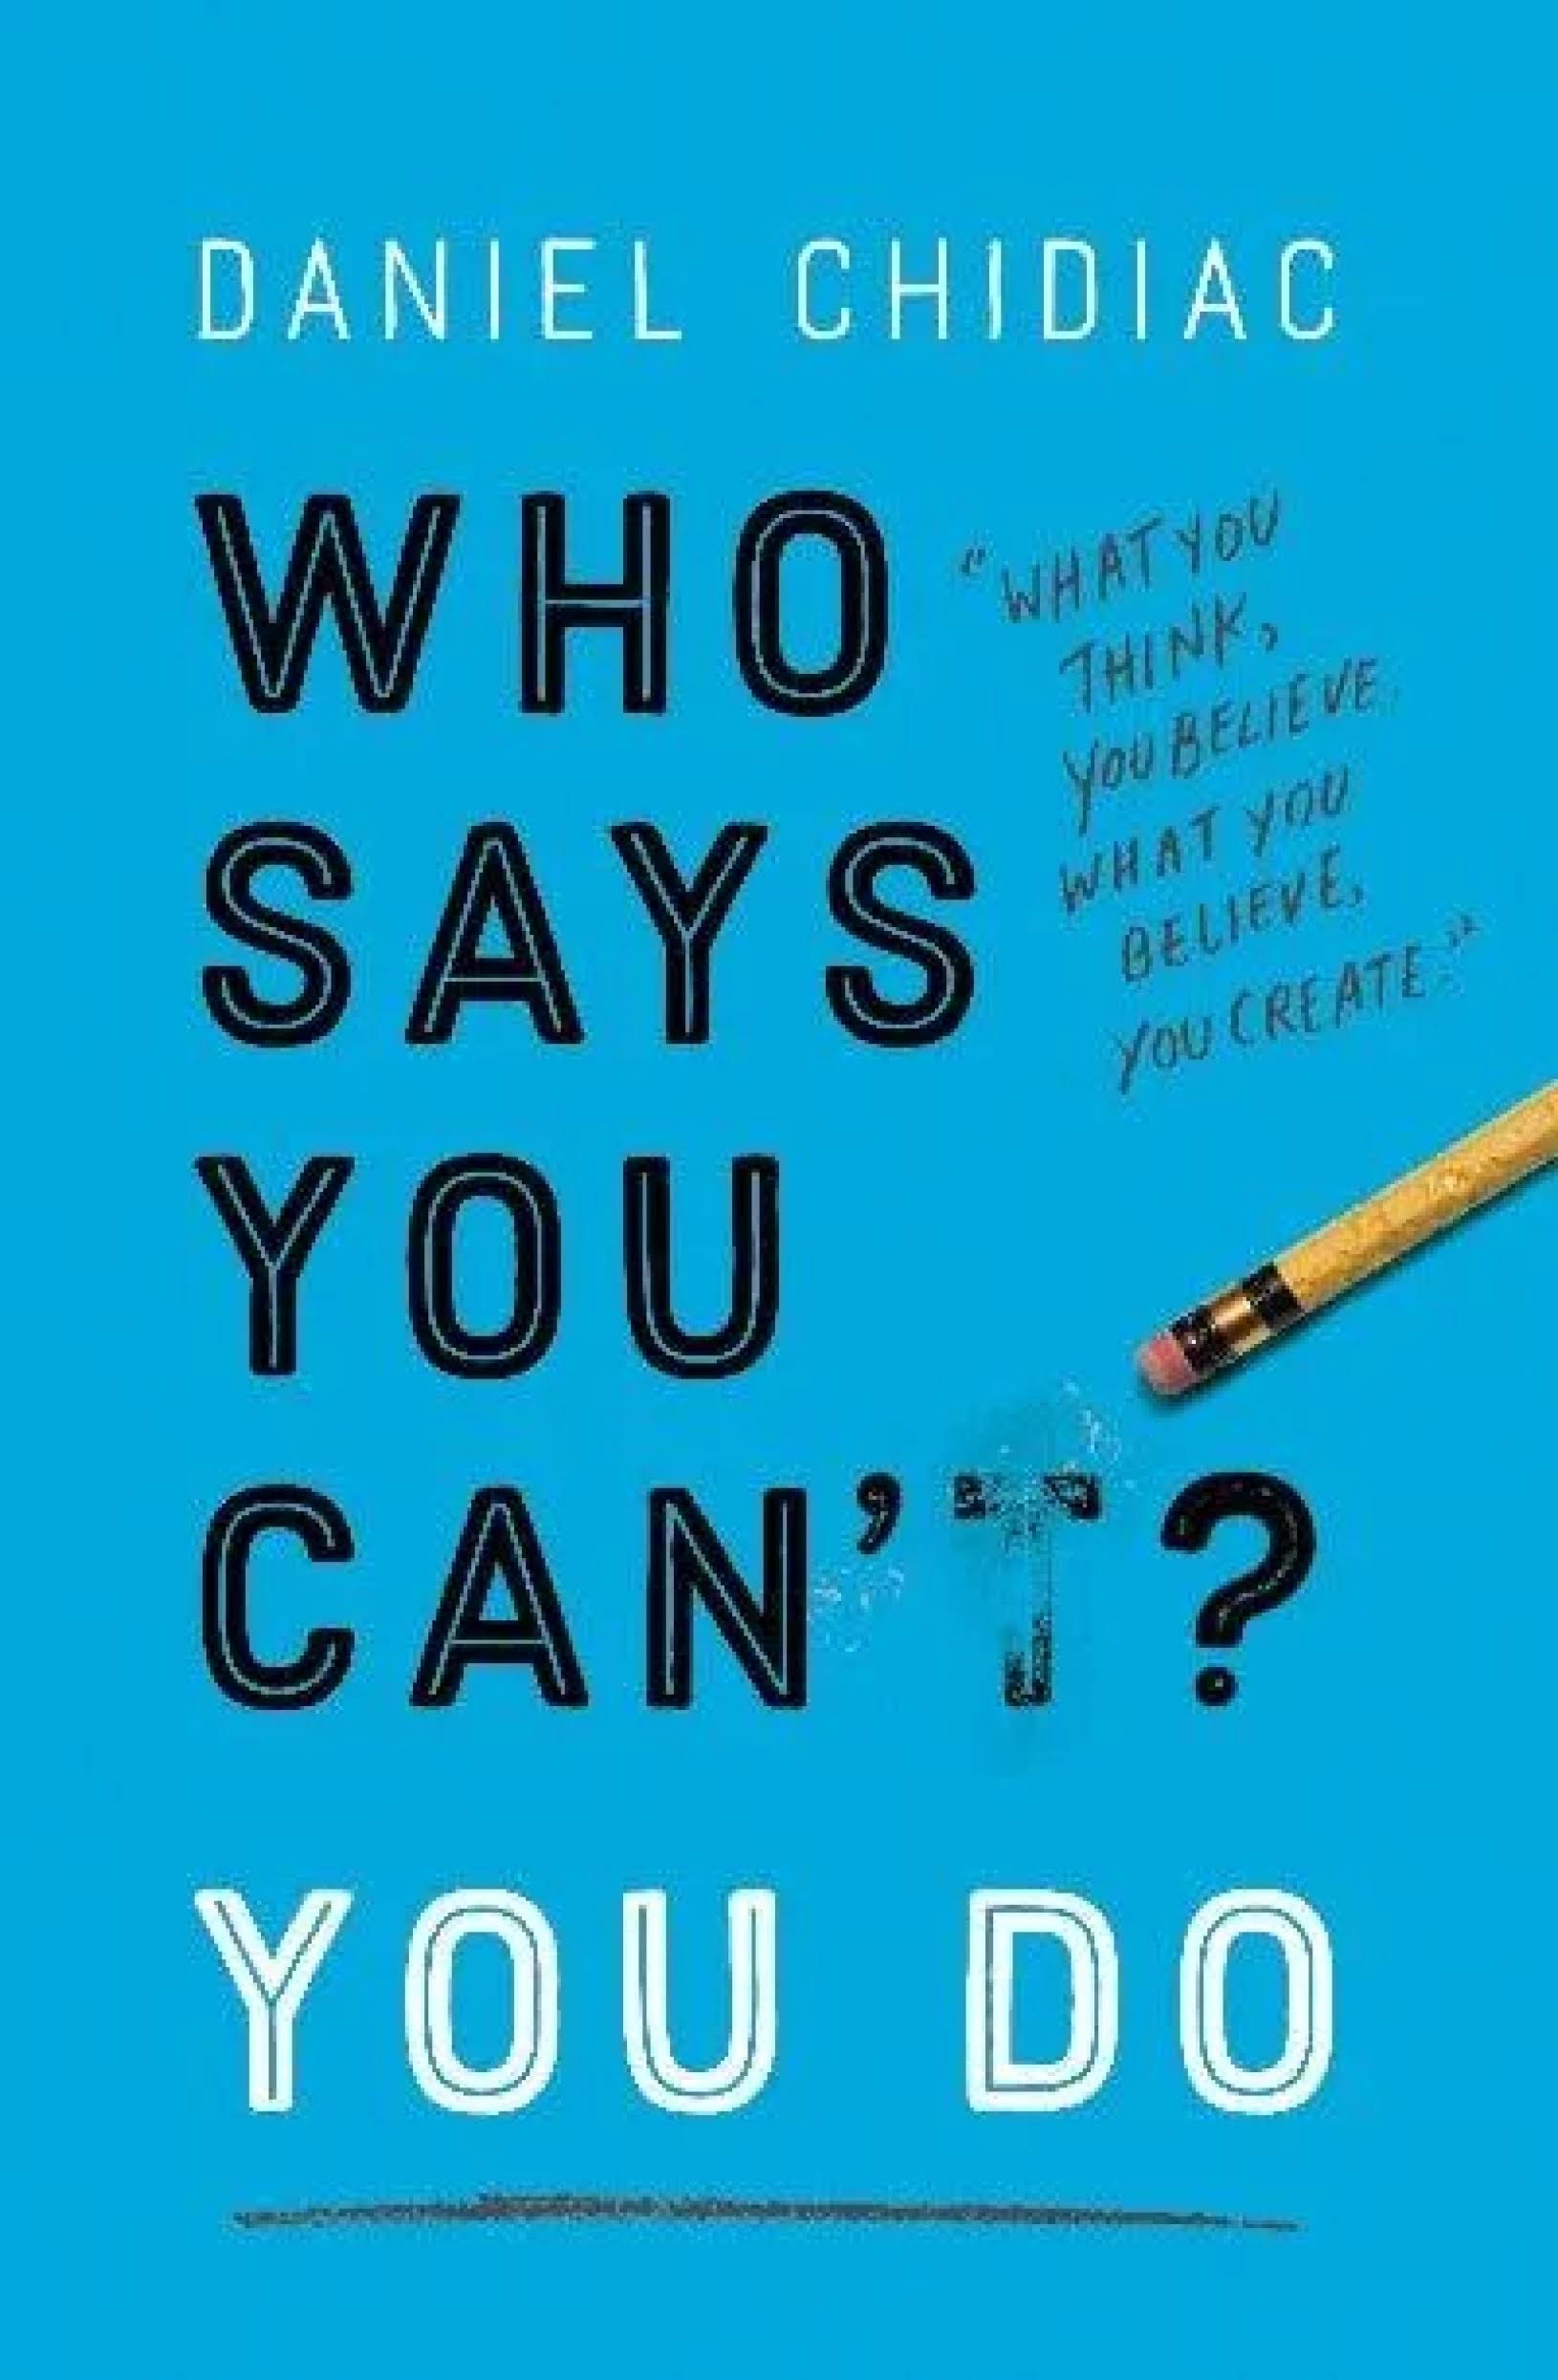 Who Says You Can't? You Do [Book]